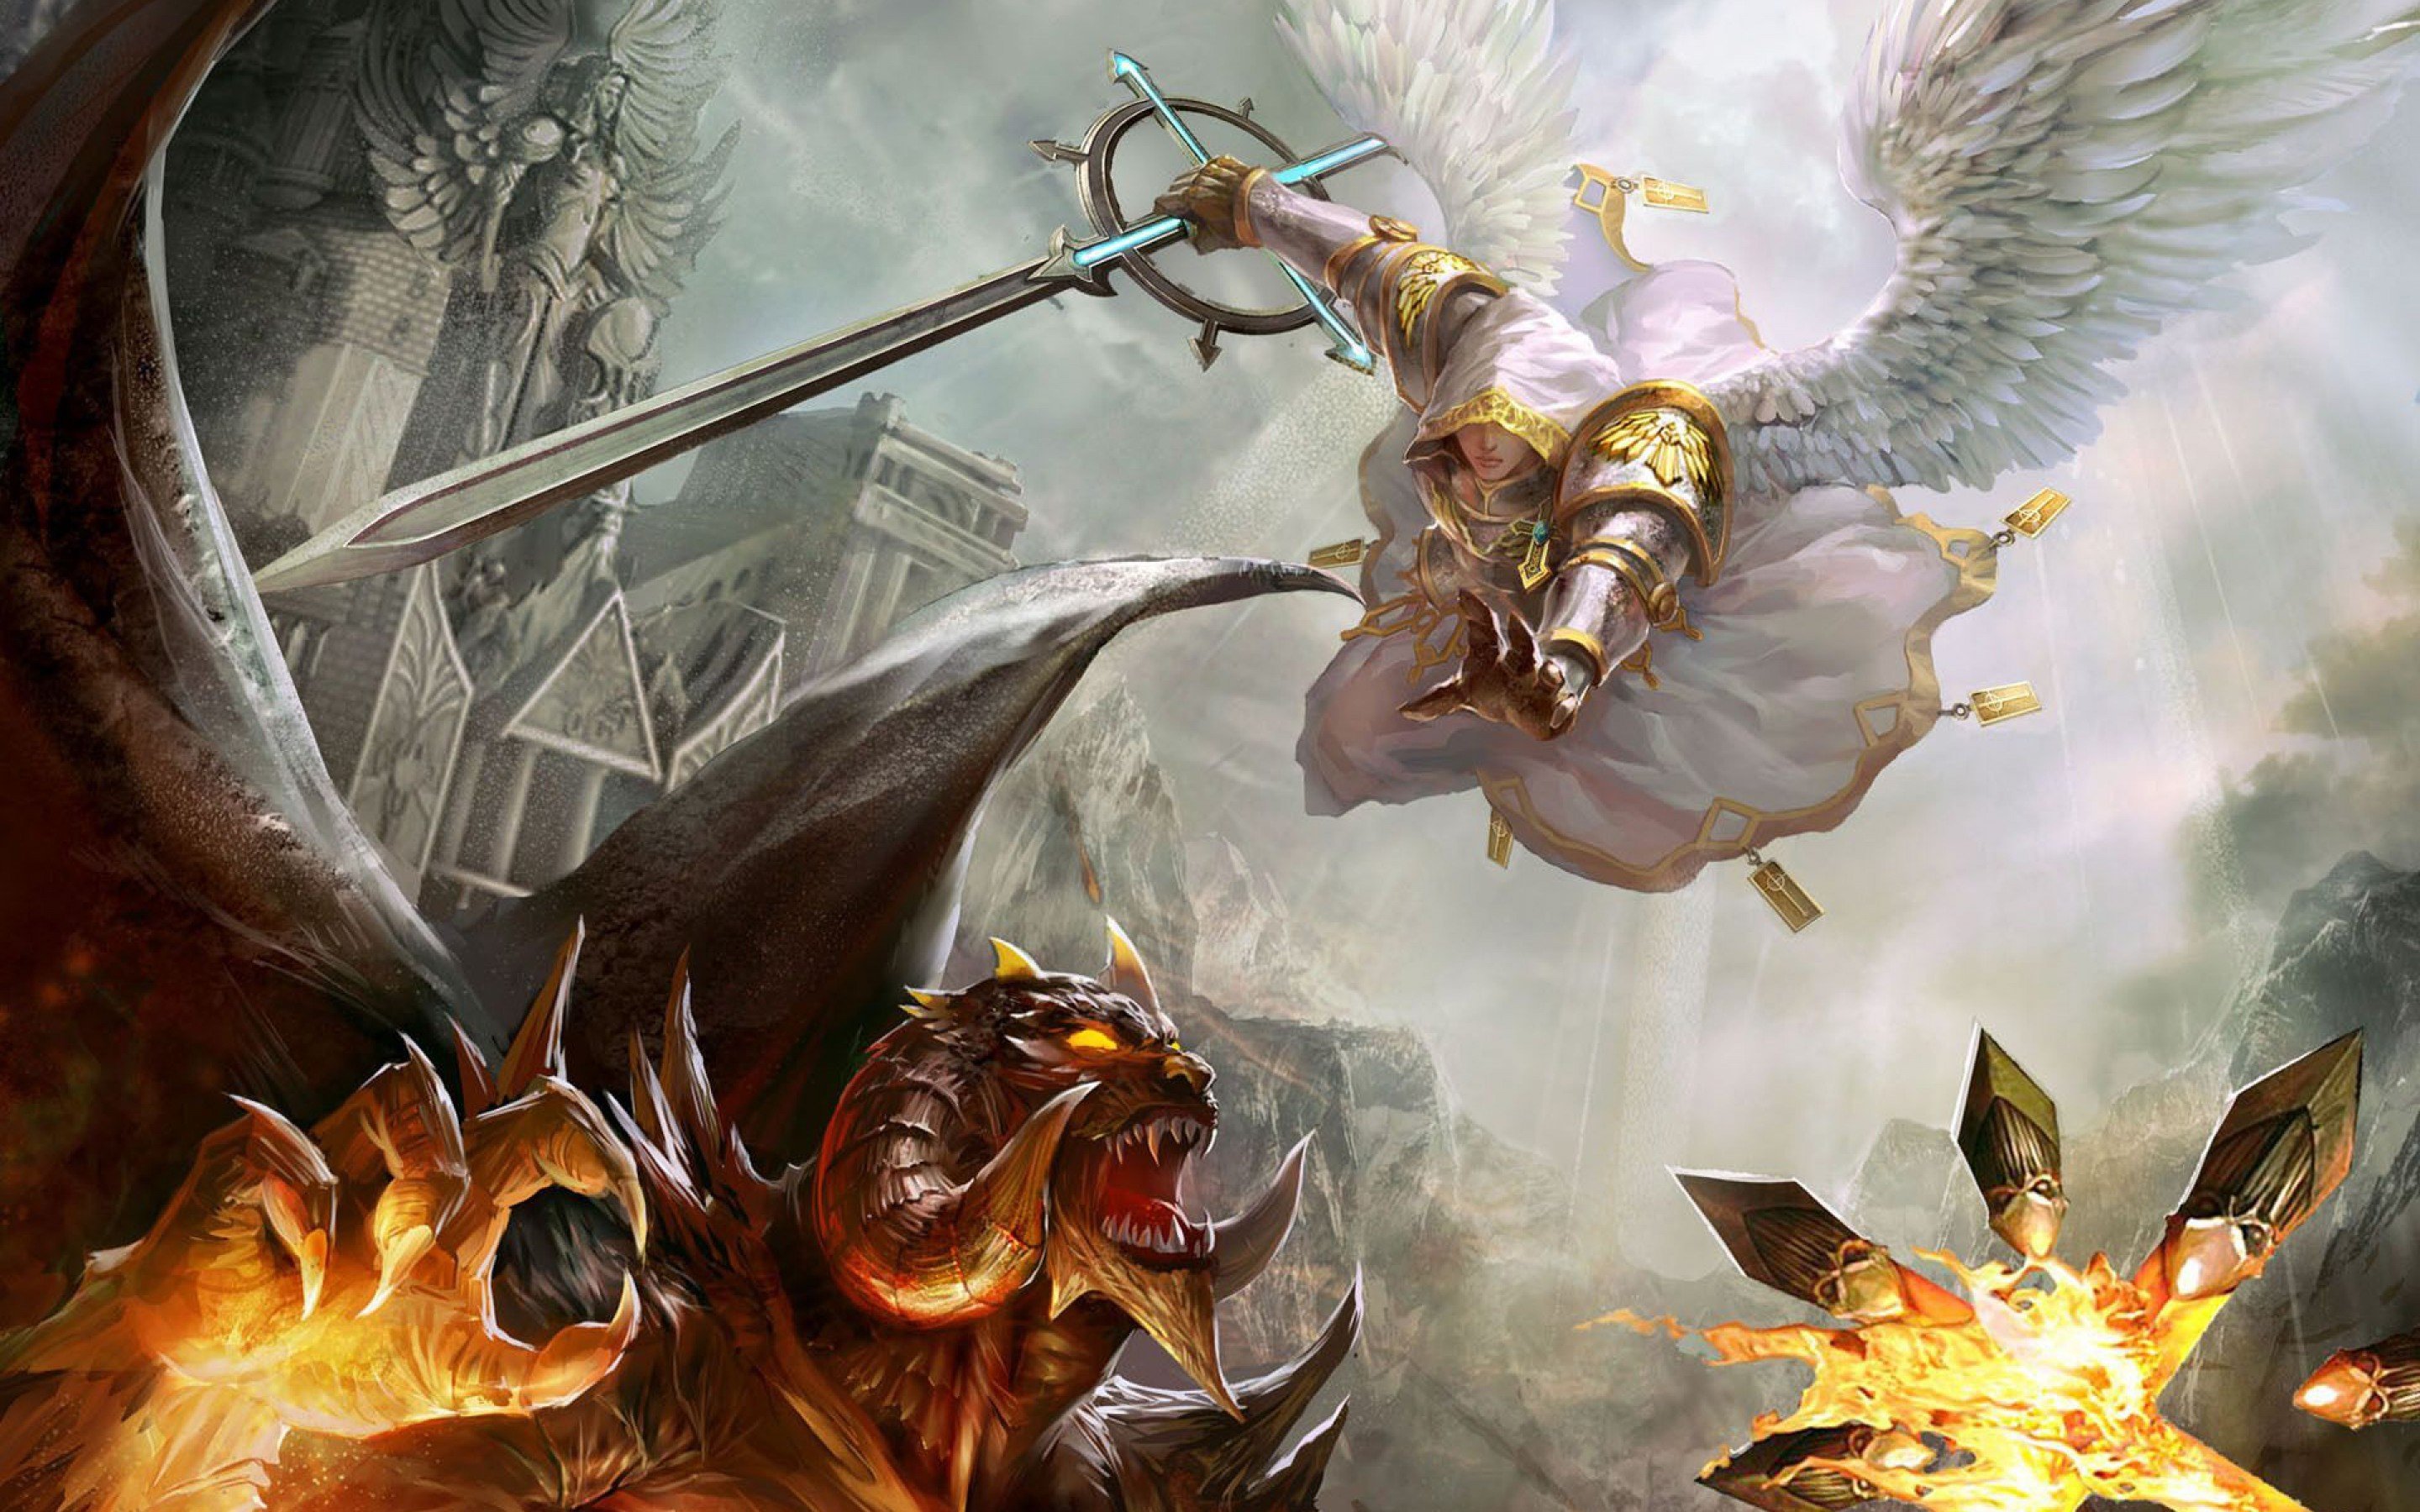 heroes, Might, Magic, Strategy, Fantasy, Fighting, Adventure, Action, Online, 1hmm, Angel, Warrior, Battle, Monster Wallpaper